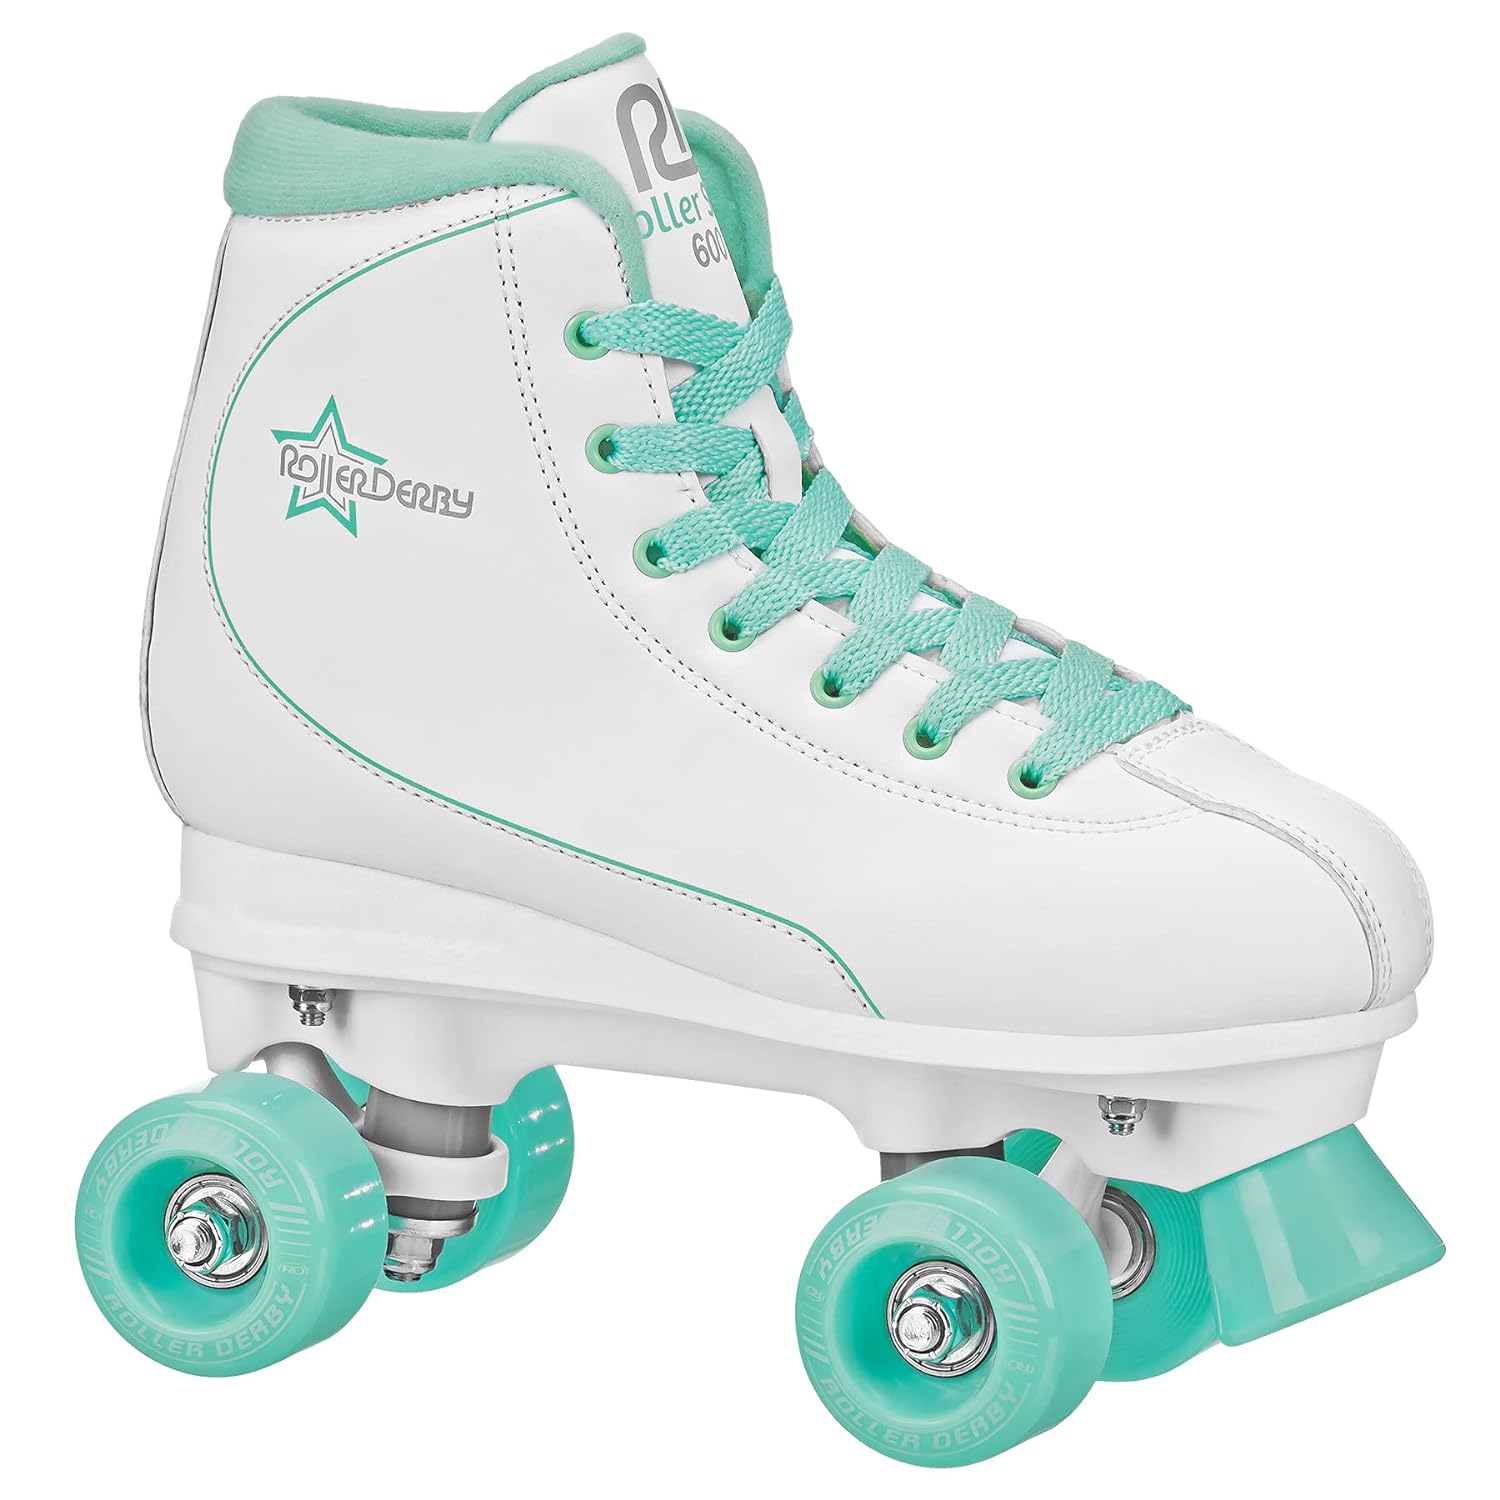 Skates work as expected. They fit well and ride smoothly. Decent quality for the price point.